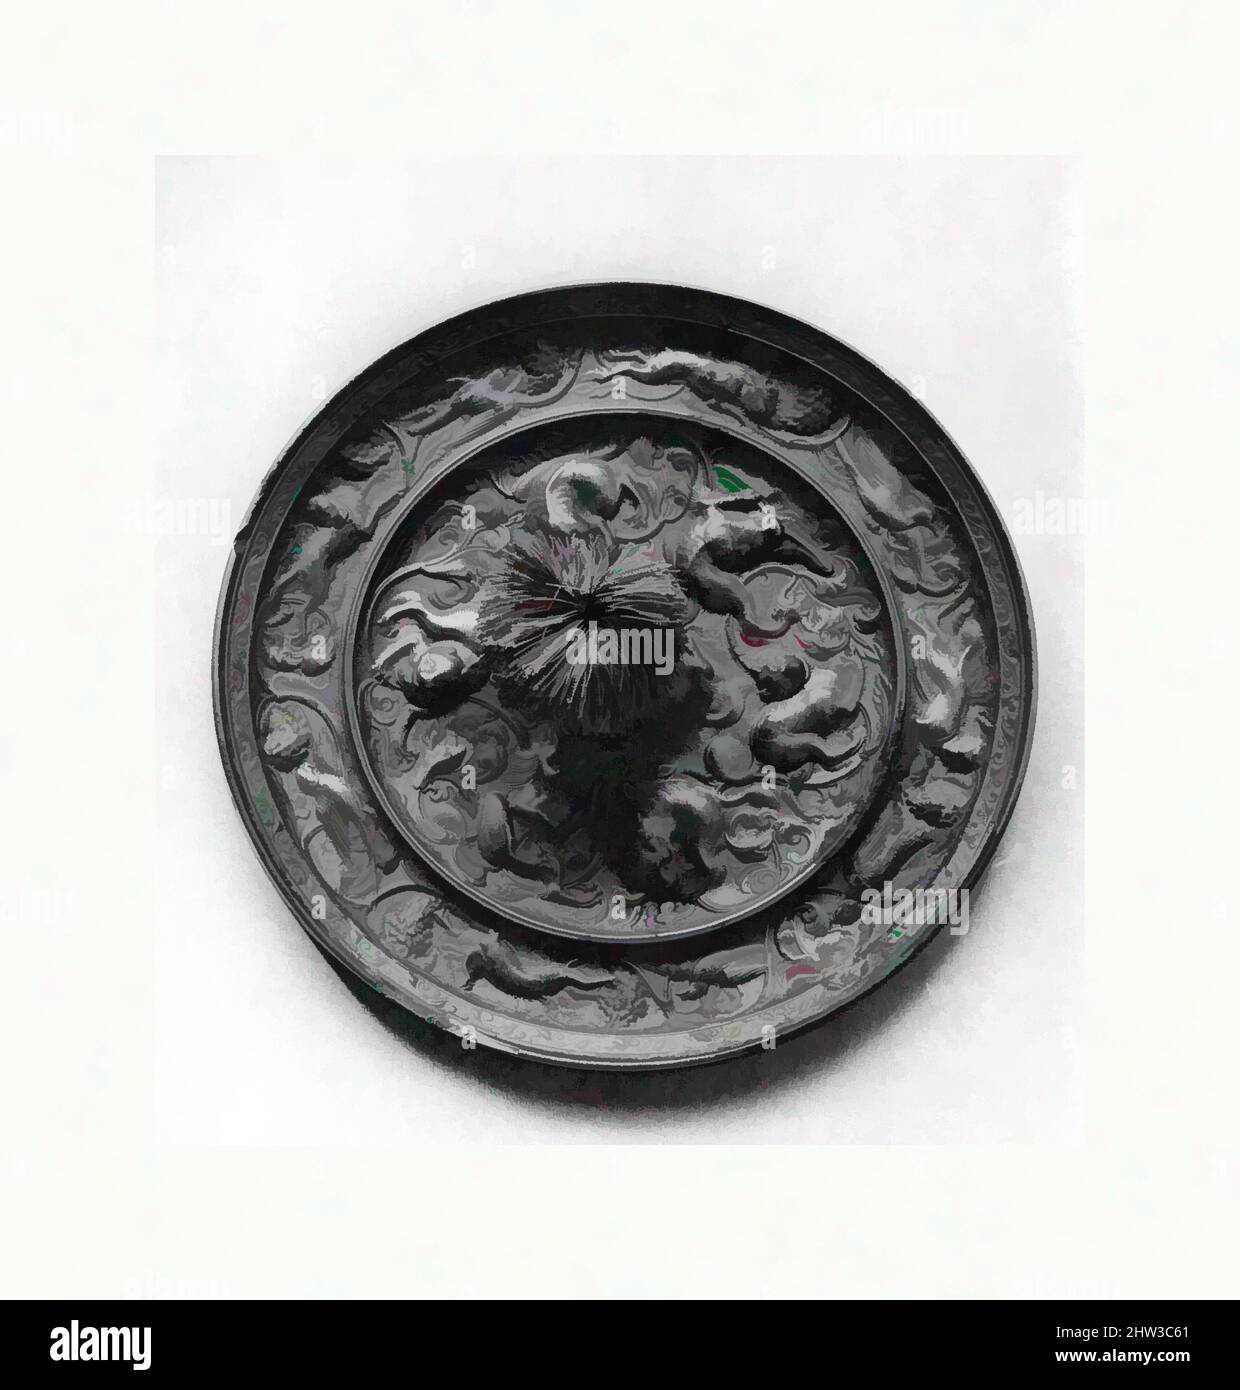 Art inspired by 唐 海獸葡萄紋銅鏡, Mirror with Grapes and Fantastic Sea Animals, Tang dynasty (618–907), 8th century, China, Bronze, Diam. 6 3/4 in. (17.1 cm), Mirrors, Classic works modernized by Artotop with a splash of modernity. Shapes, color and value, eye-catching visual impact on art. Emotions through freedom of artworks in a contemporary way. A timeless message pursuing a wildly creative new direction. Artists turning to the digital medium and creating the Artotop NFT Stock Photo